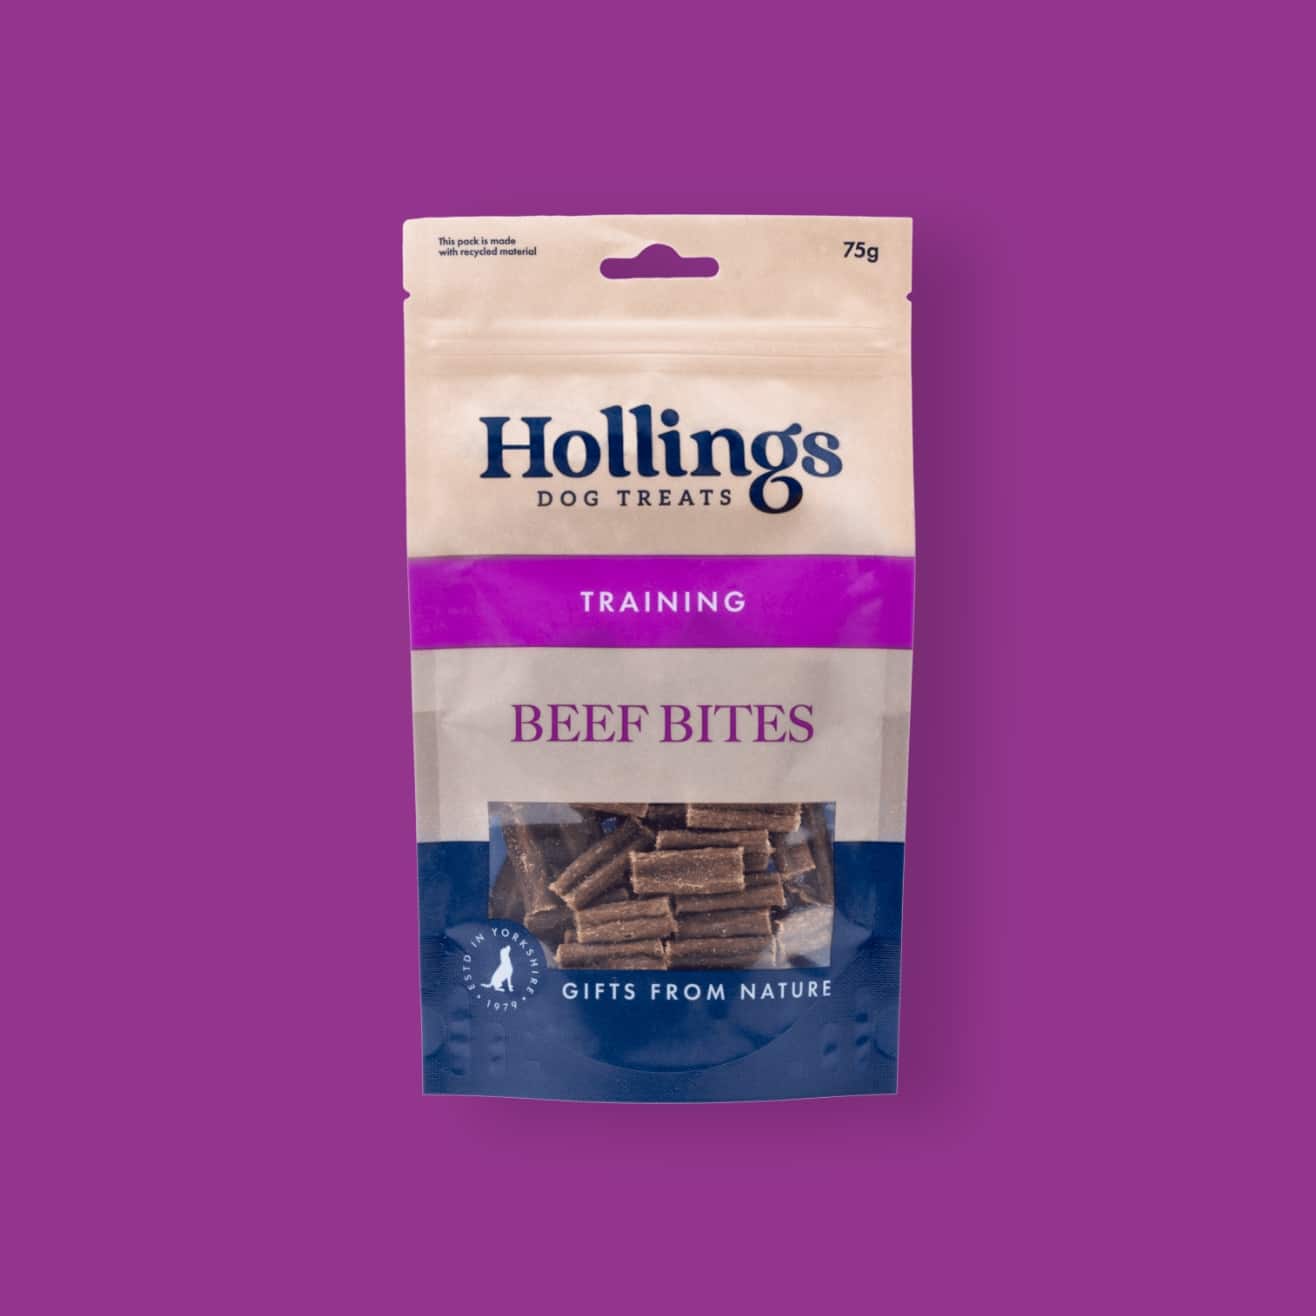 Packaging design for dog treats by Bluestone98